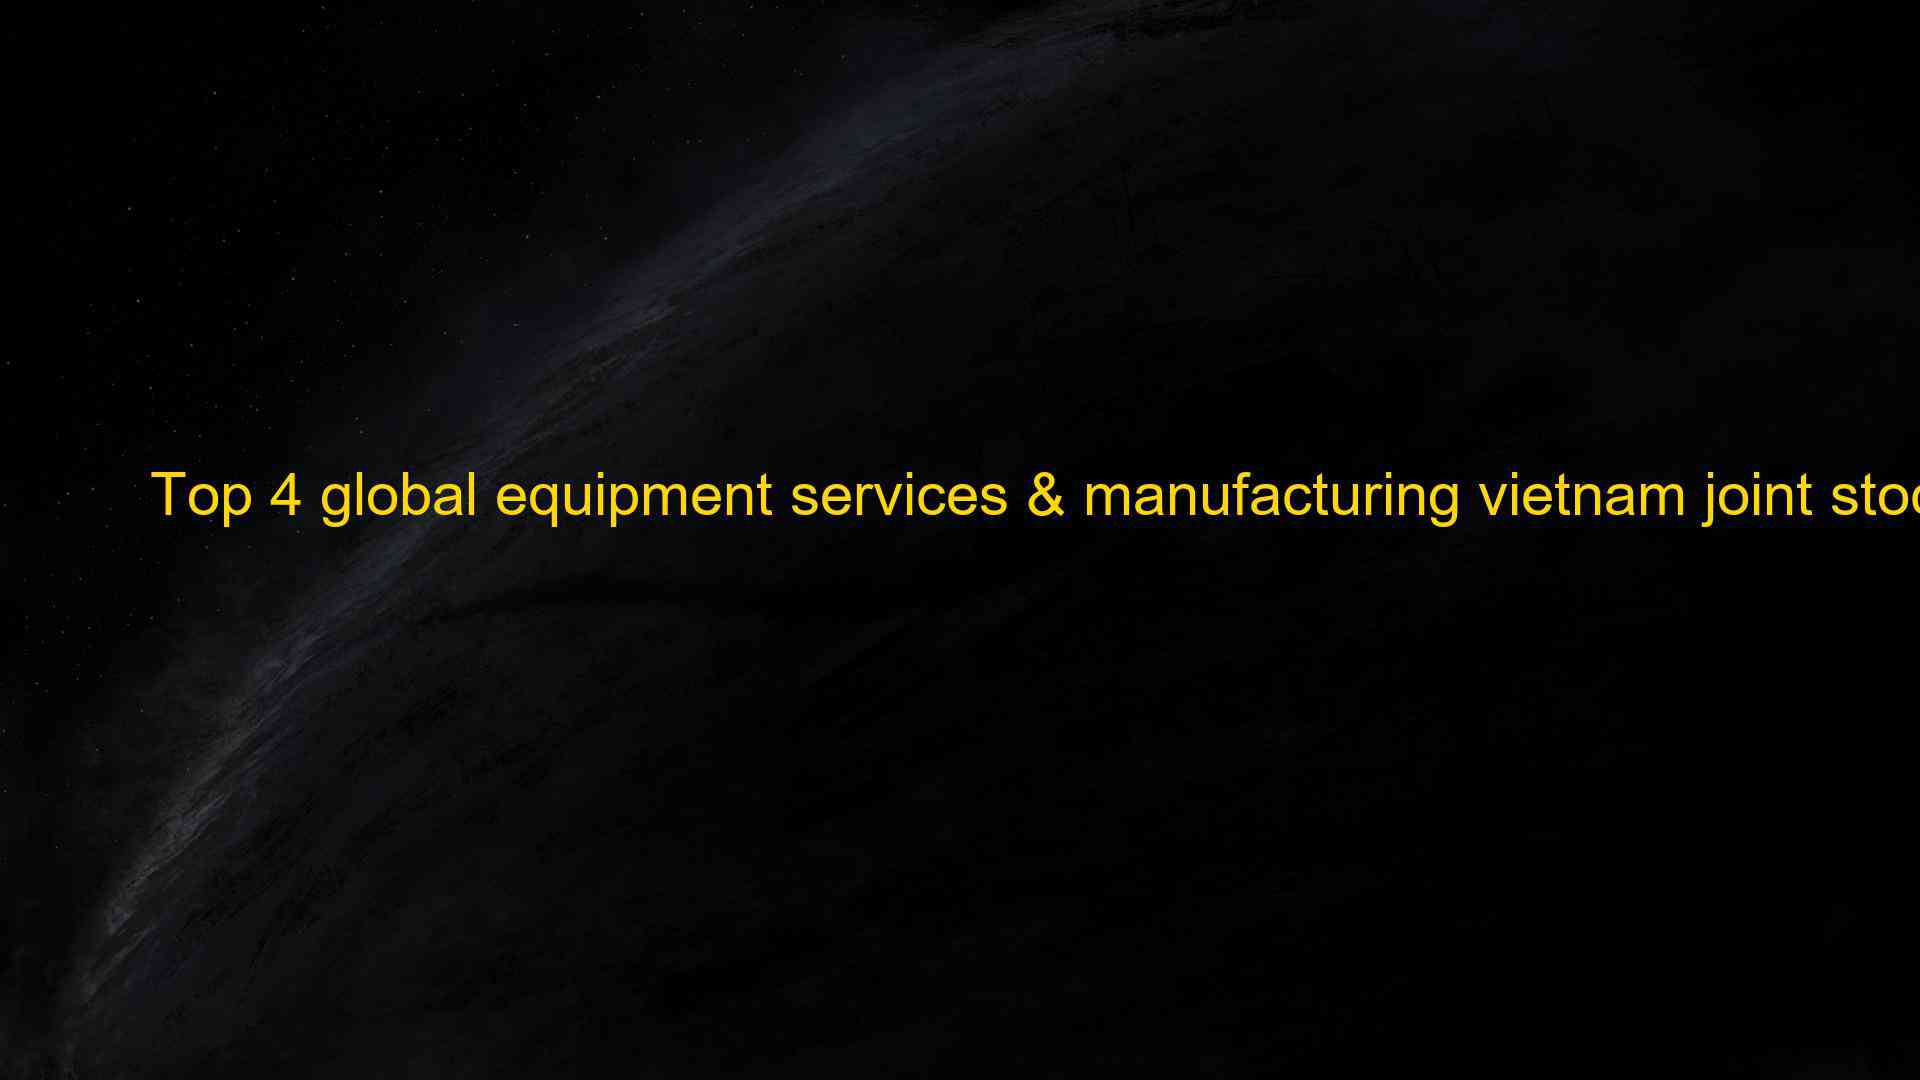 Top 4 global equipment services manufacturing vietnam joint stock company in 2022 1660075397